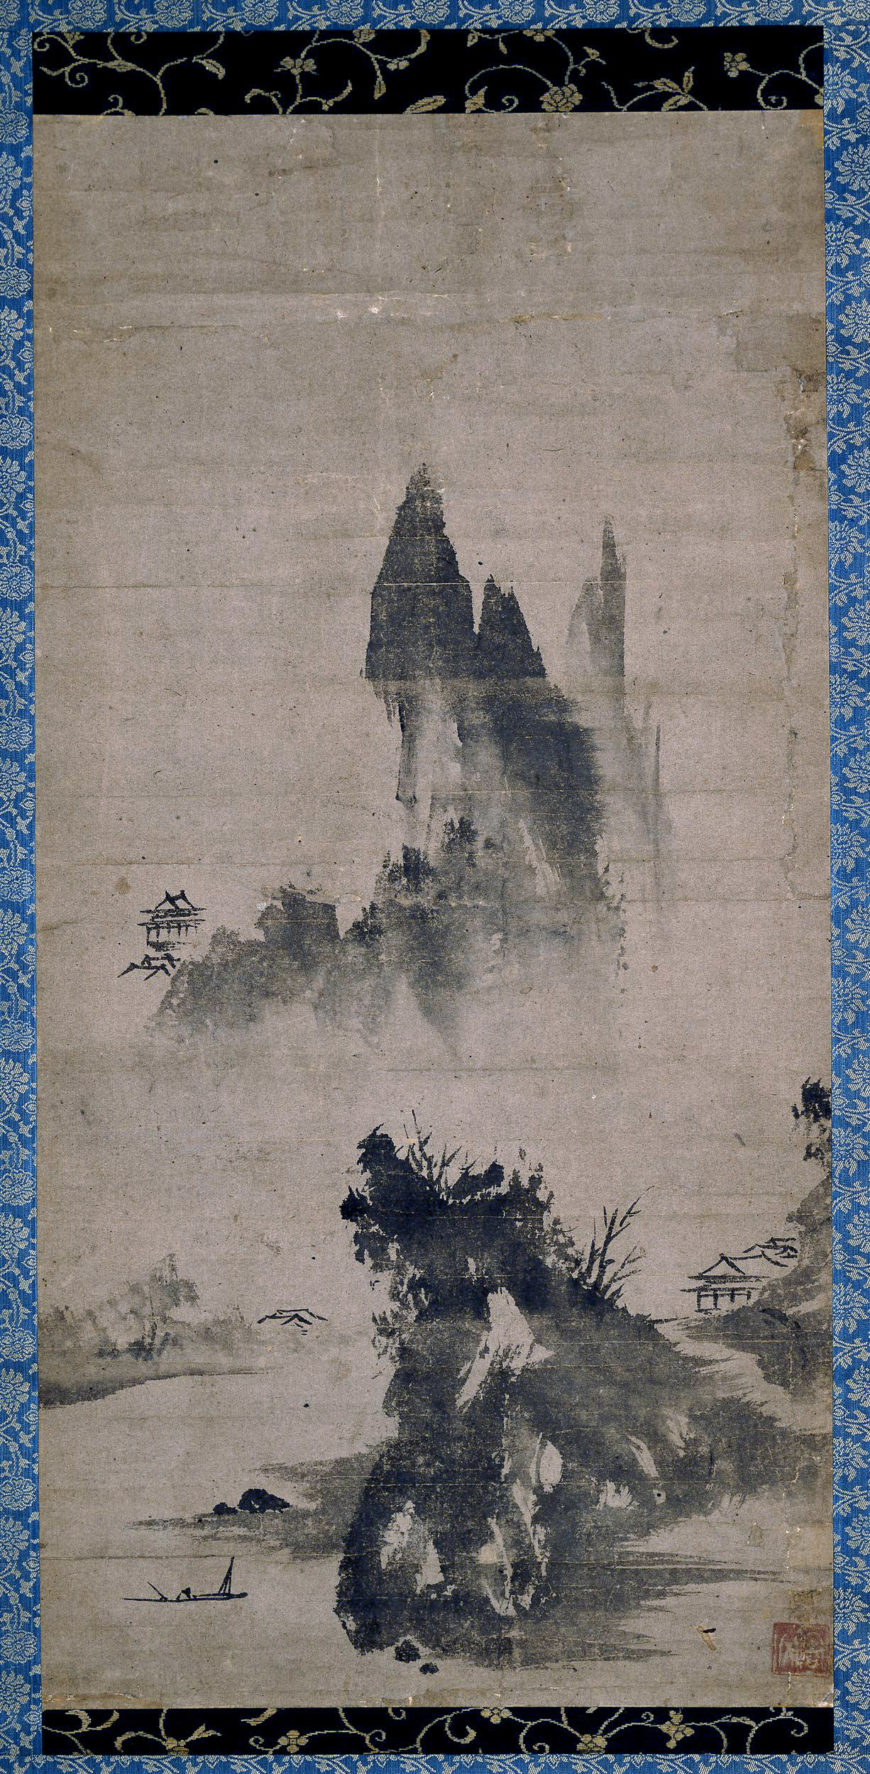 Sessō Tōyō, Haboku-style landscape, a hanging scroll painting, 15th century,Muromachi period, Japan, 63.5 x 31.7 cm (© The Trustees of the British Museum)